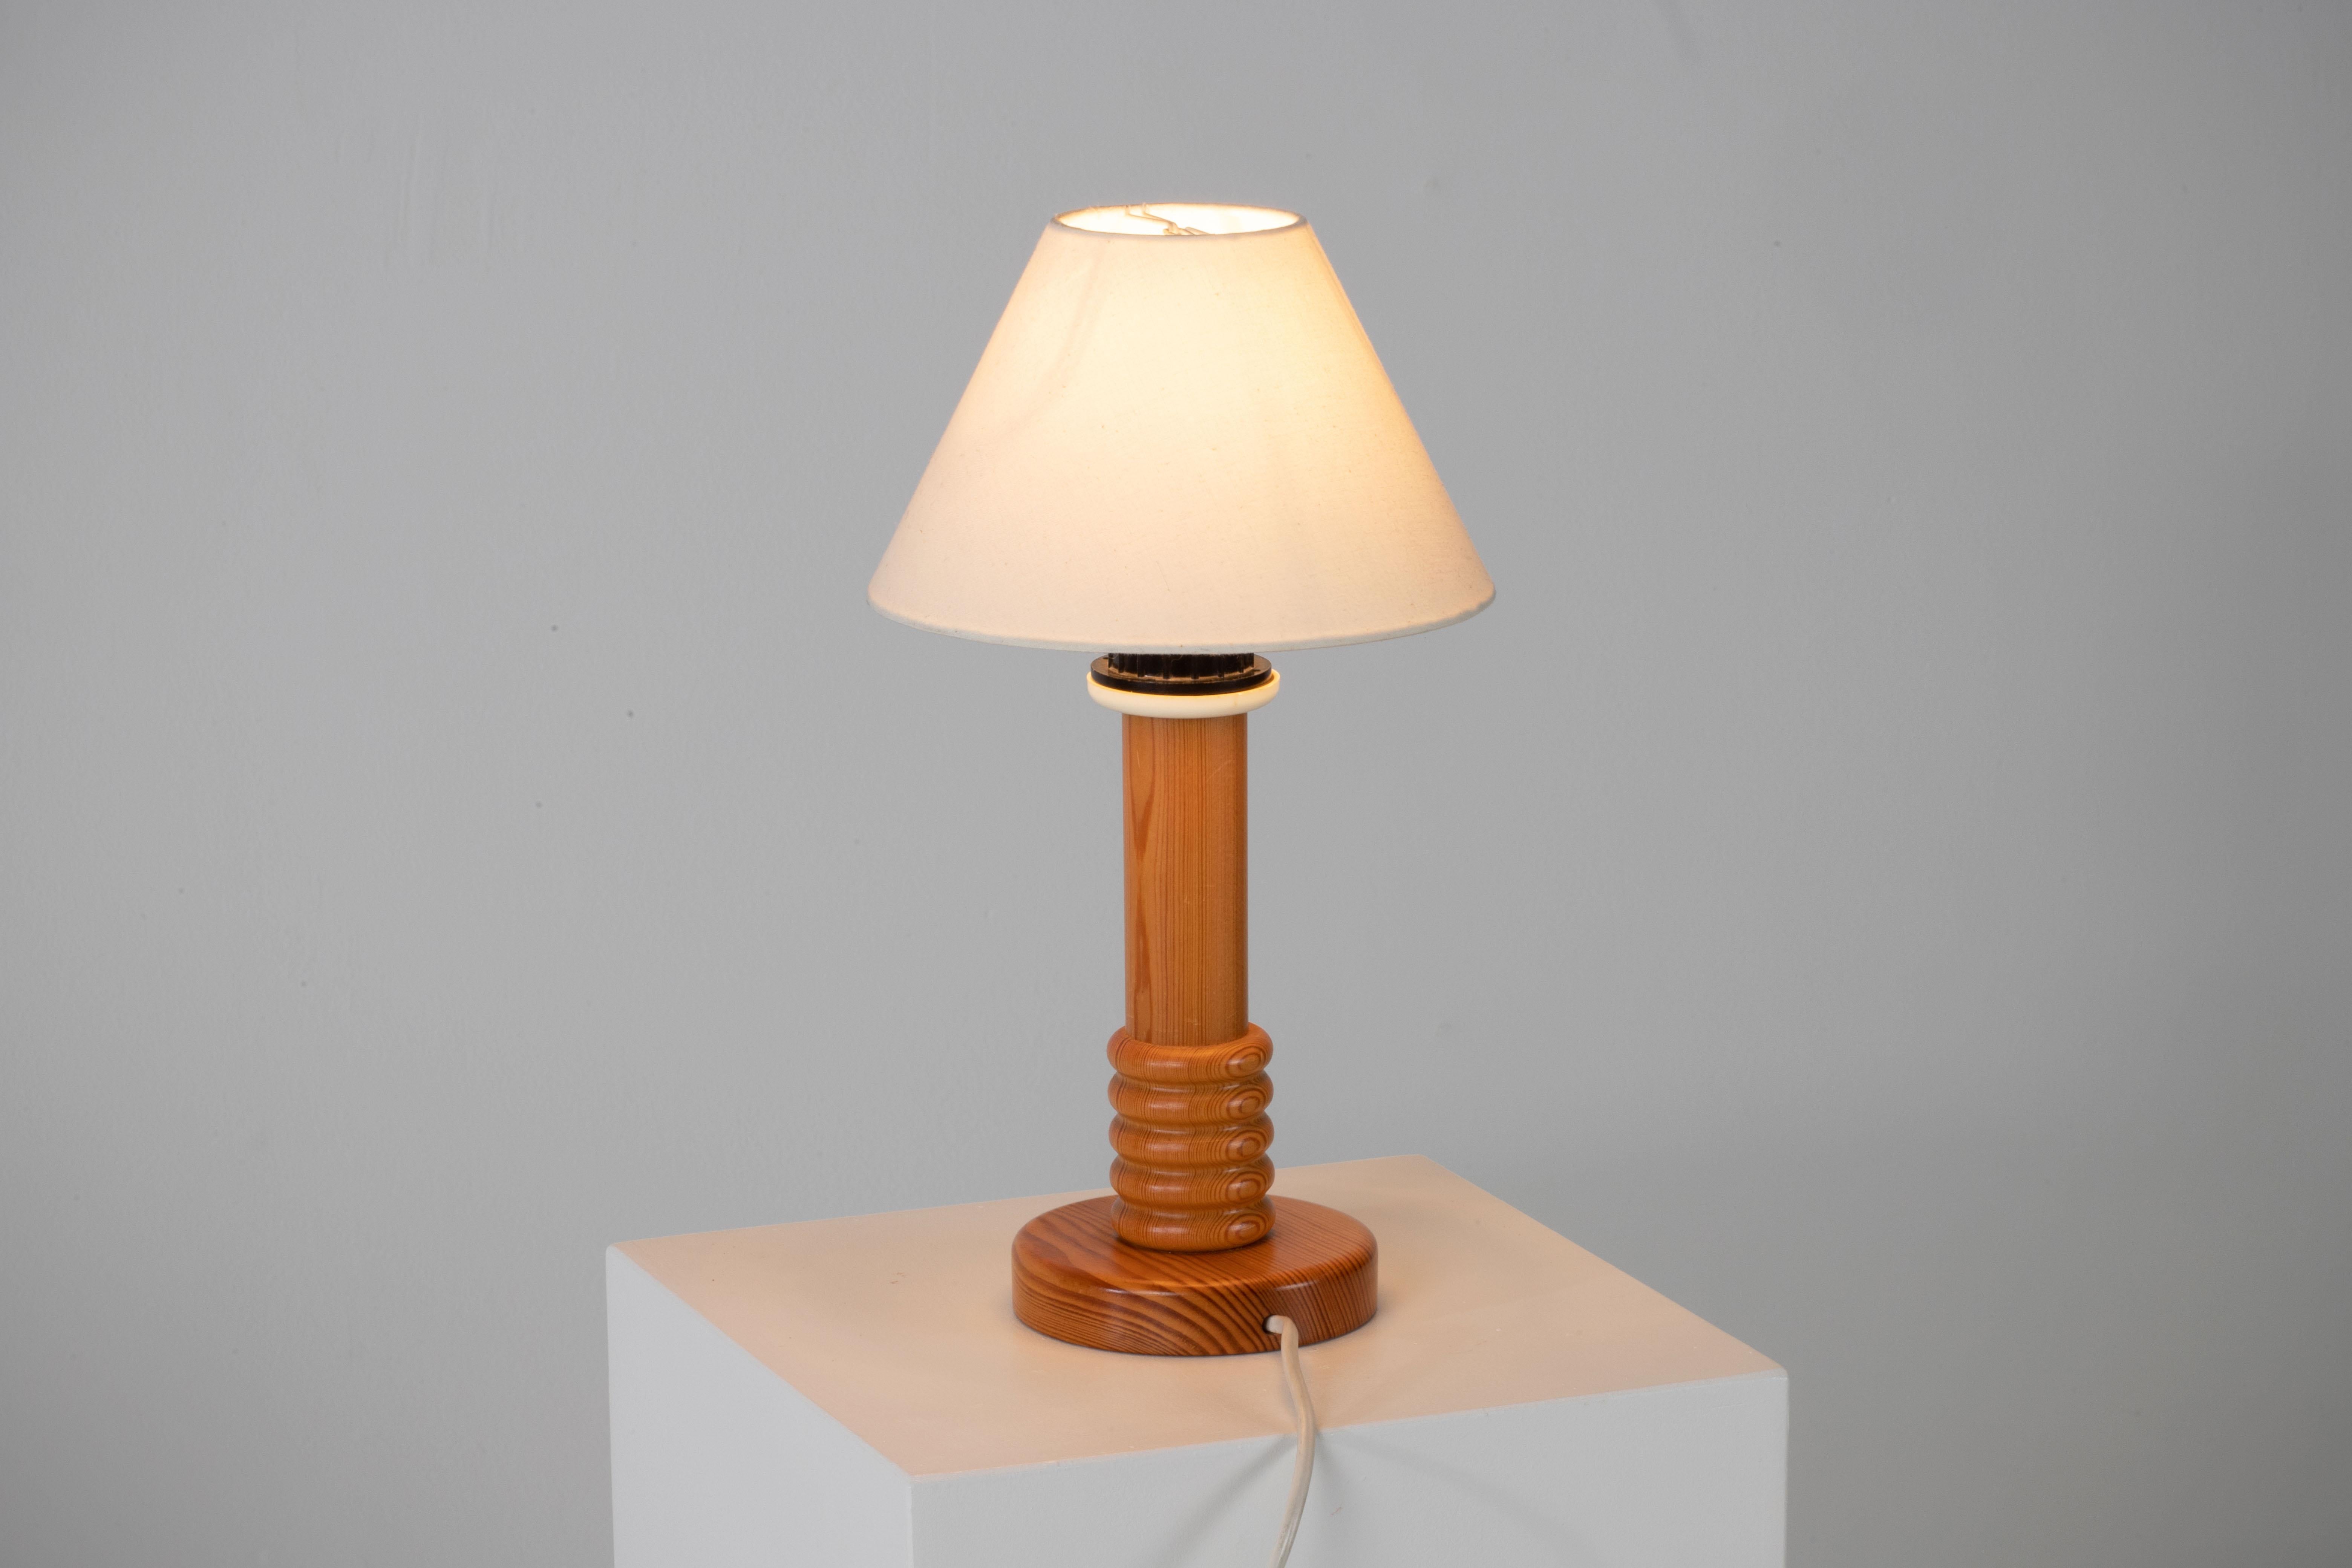 Introducing a stunning pair of mid-century table lamps that exude timeless elegance and style. Crafted from solid pine, these lamps were made in Denmark during the 1960s, showcasing the iconic design influence of Uno Kristiansson.

These lamps are